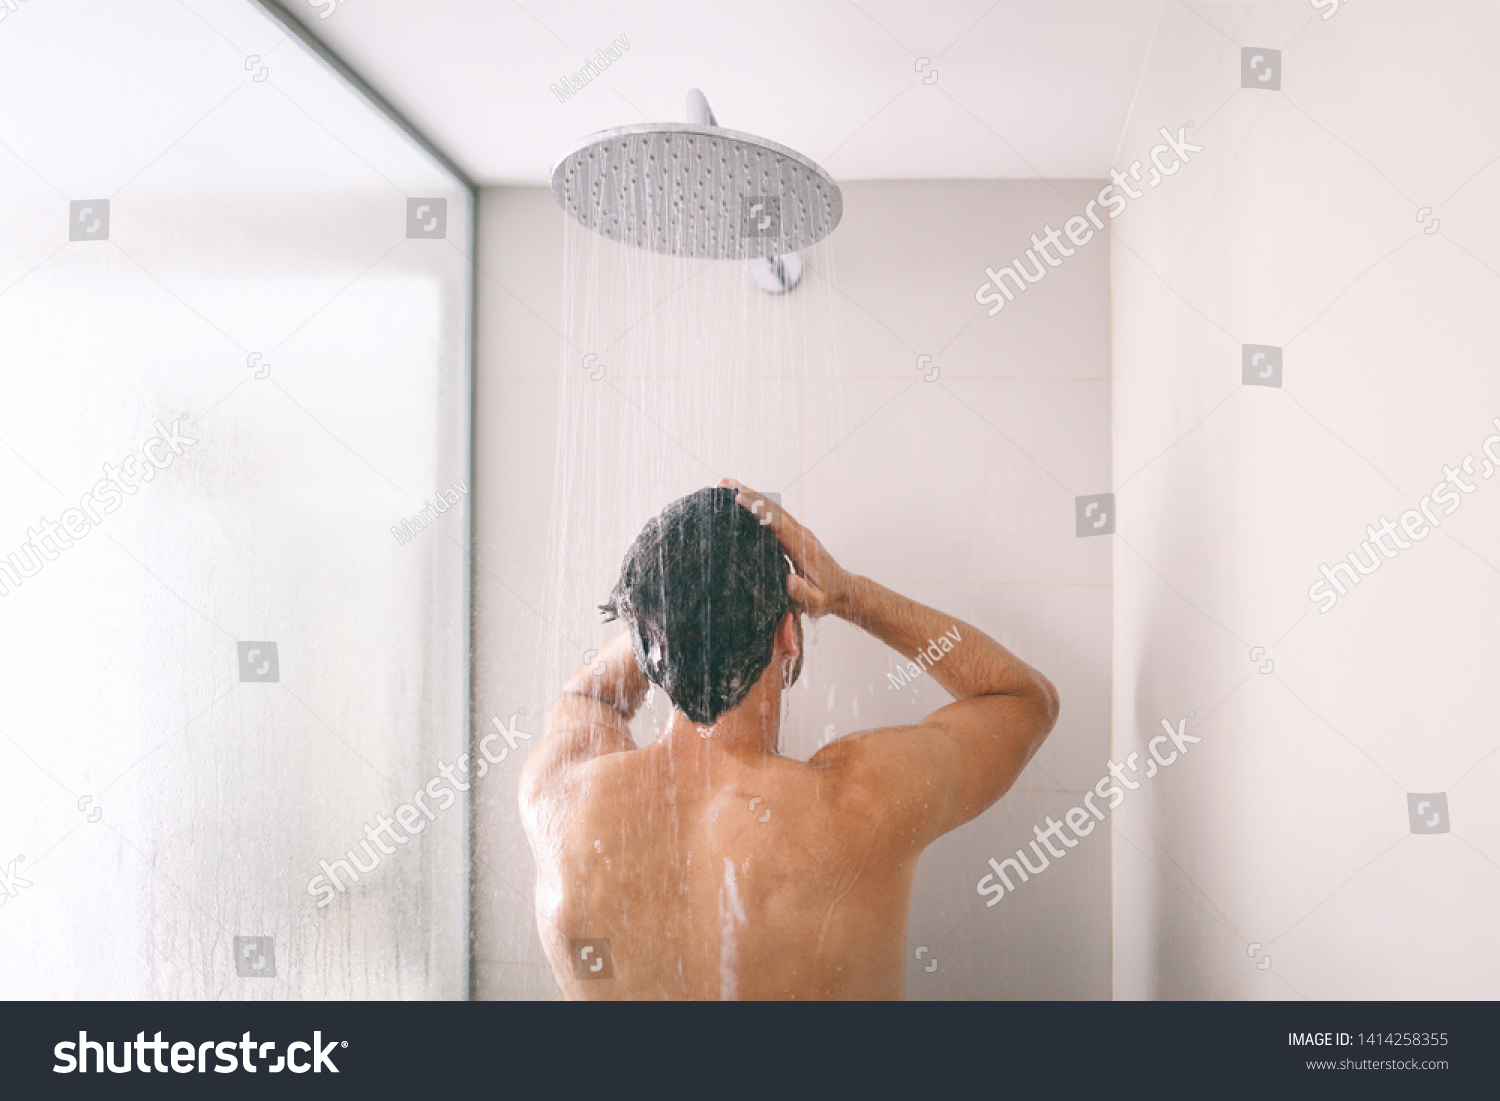 Man taking a shower washing hair with shampoo product under water falling from luxury rain shower head. Morning routine luxury hotel lifestyle guy showering. body care hygiene. #1414258355